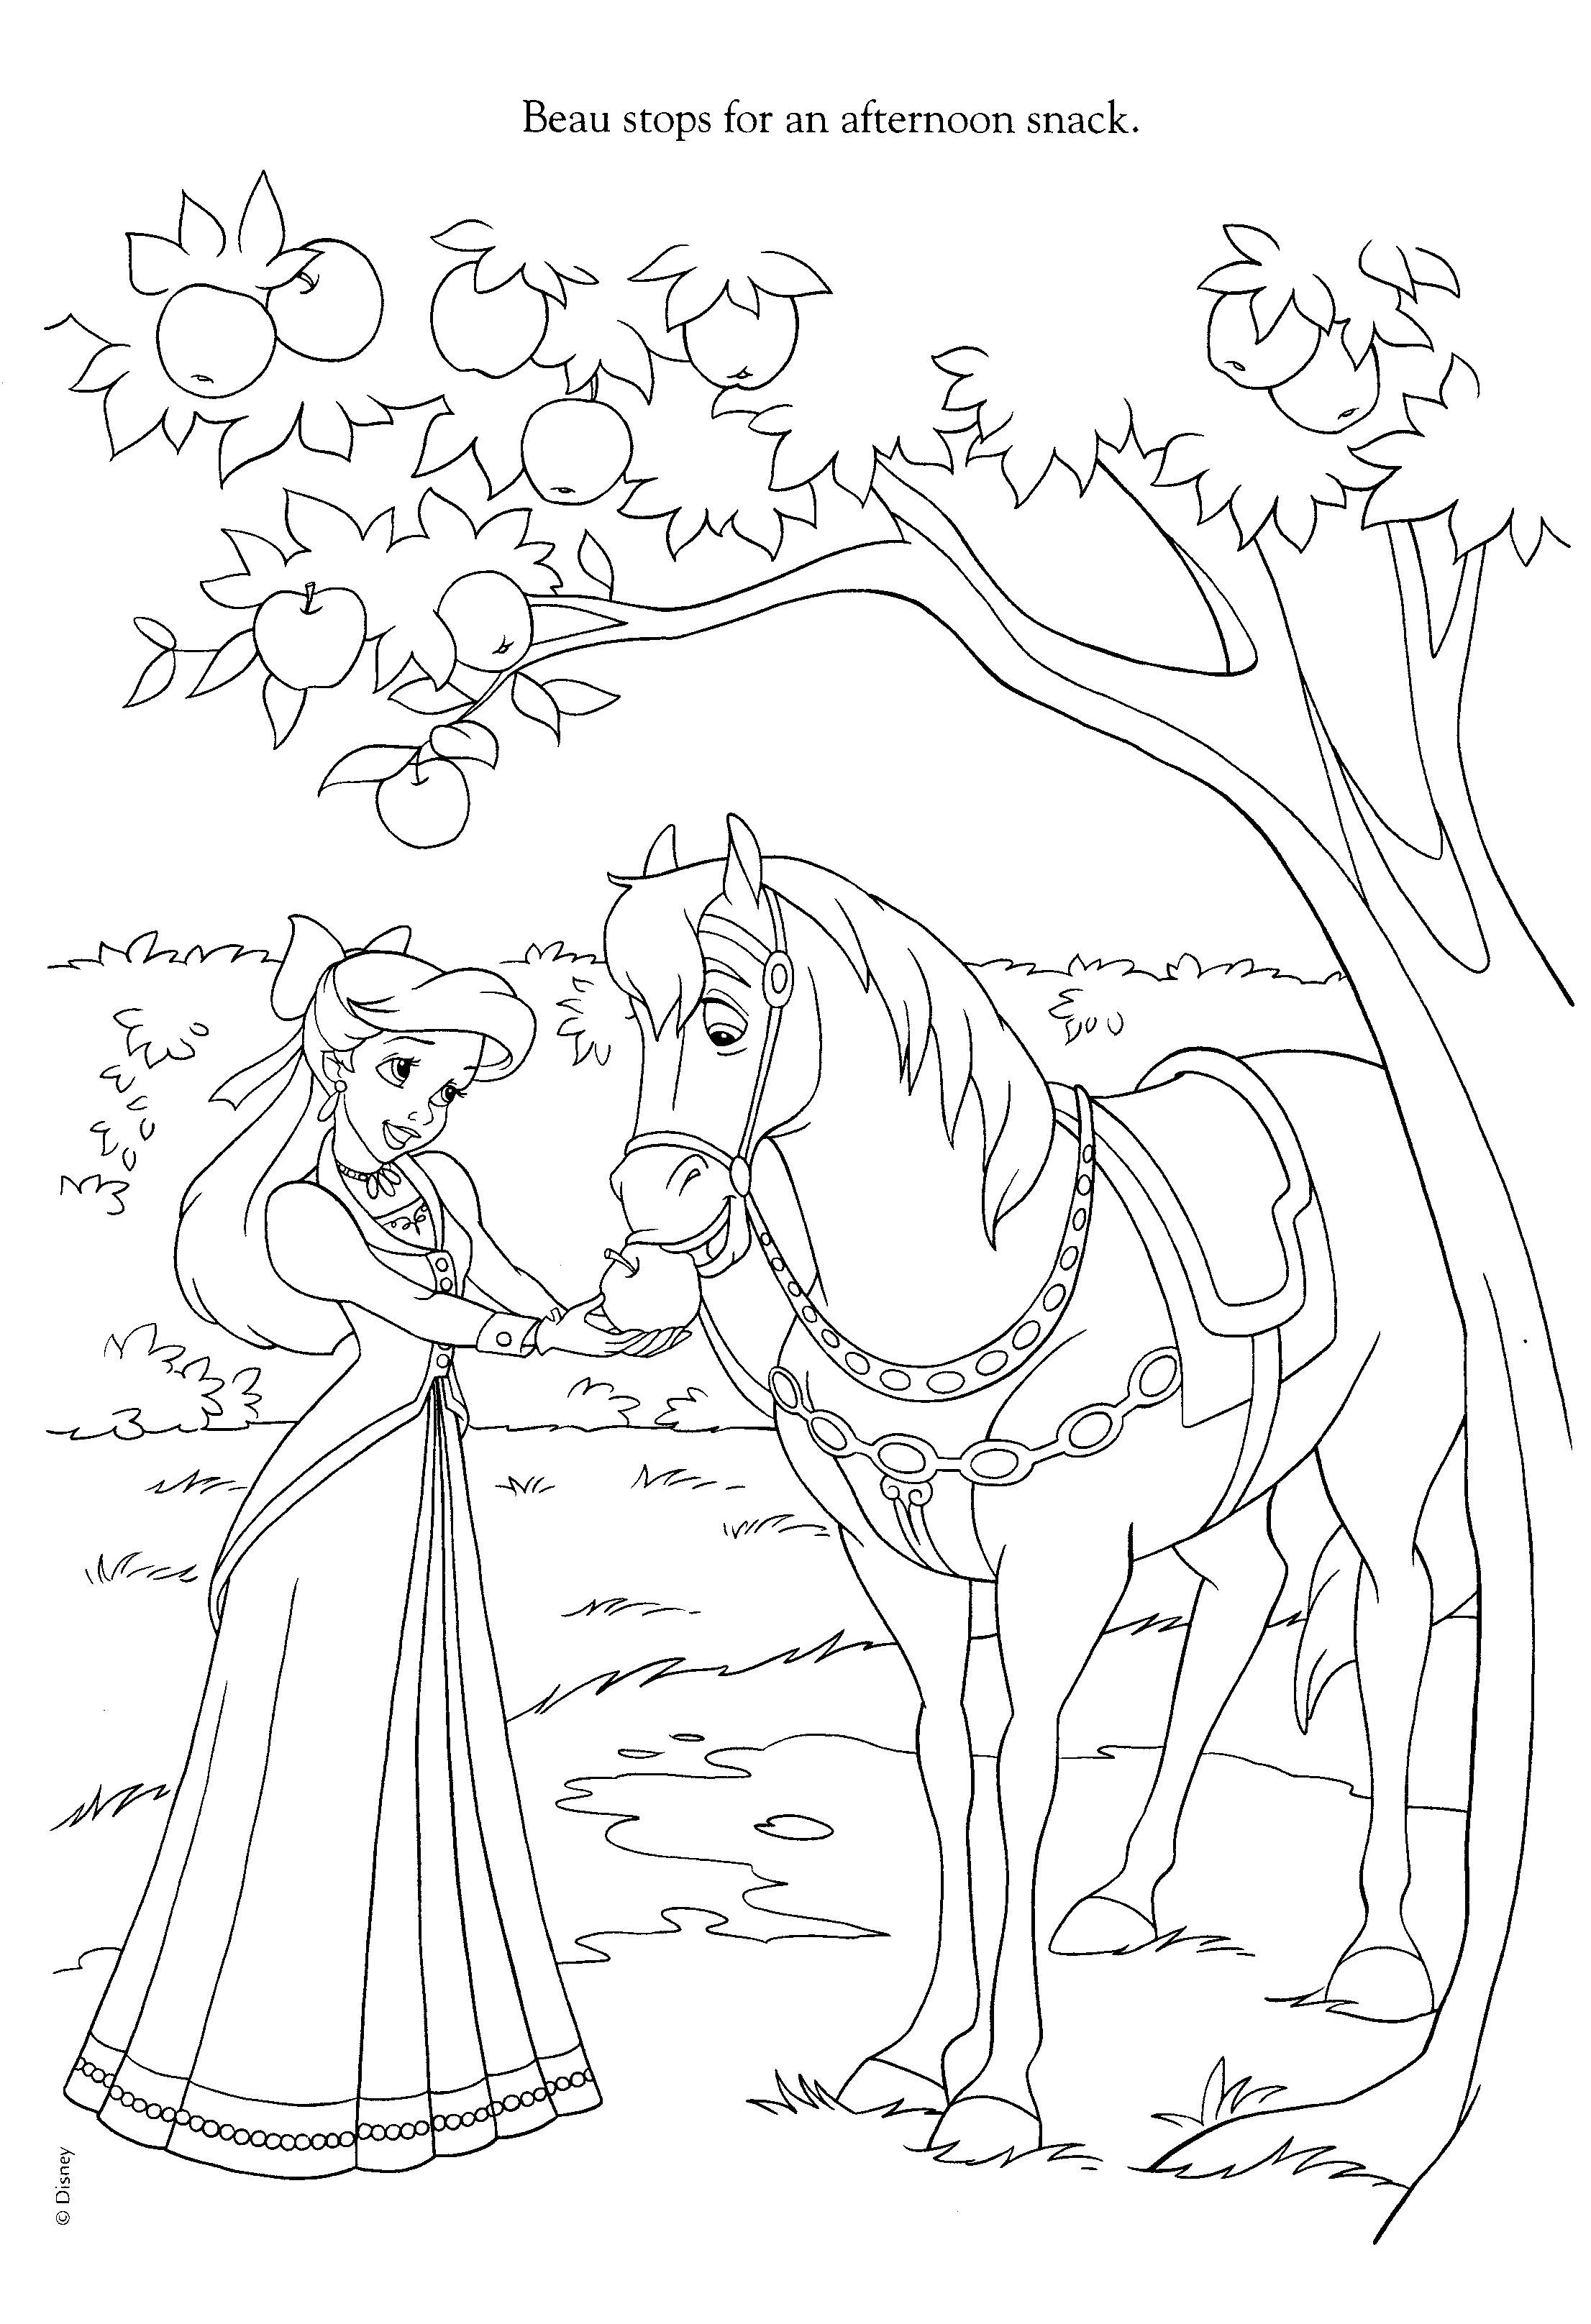 Disney Horse Coloring Pages   Coloring Home